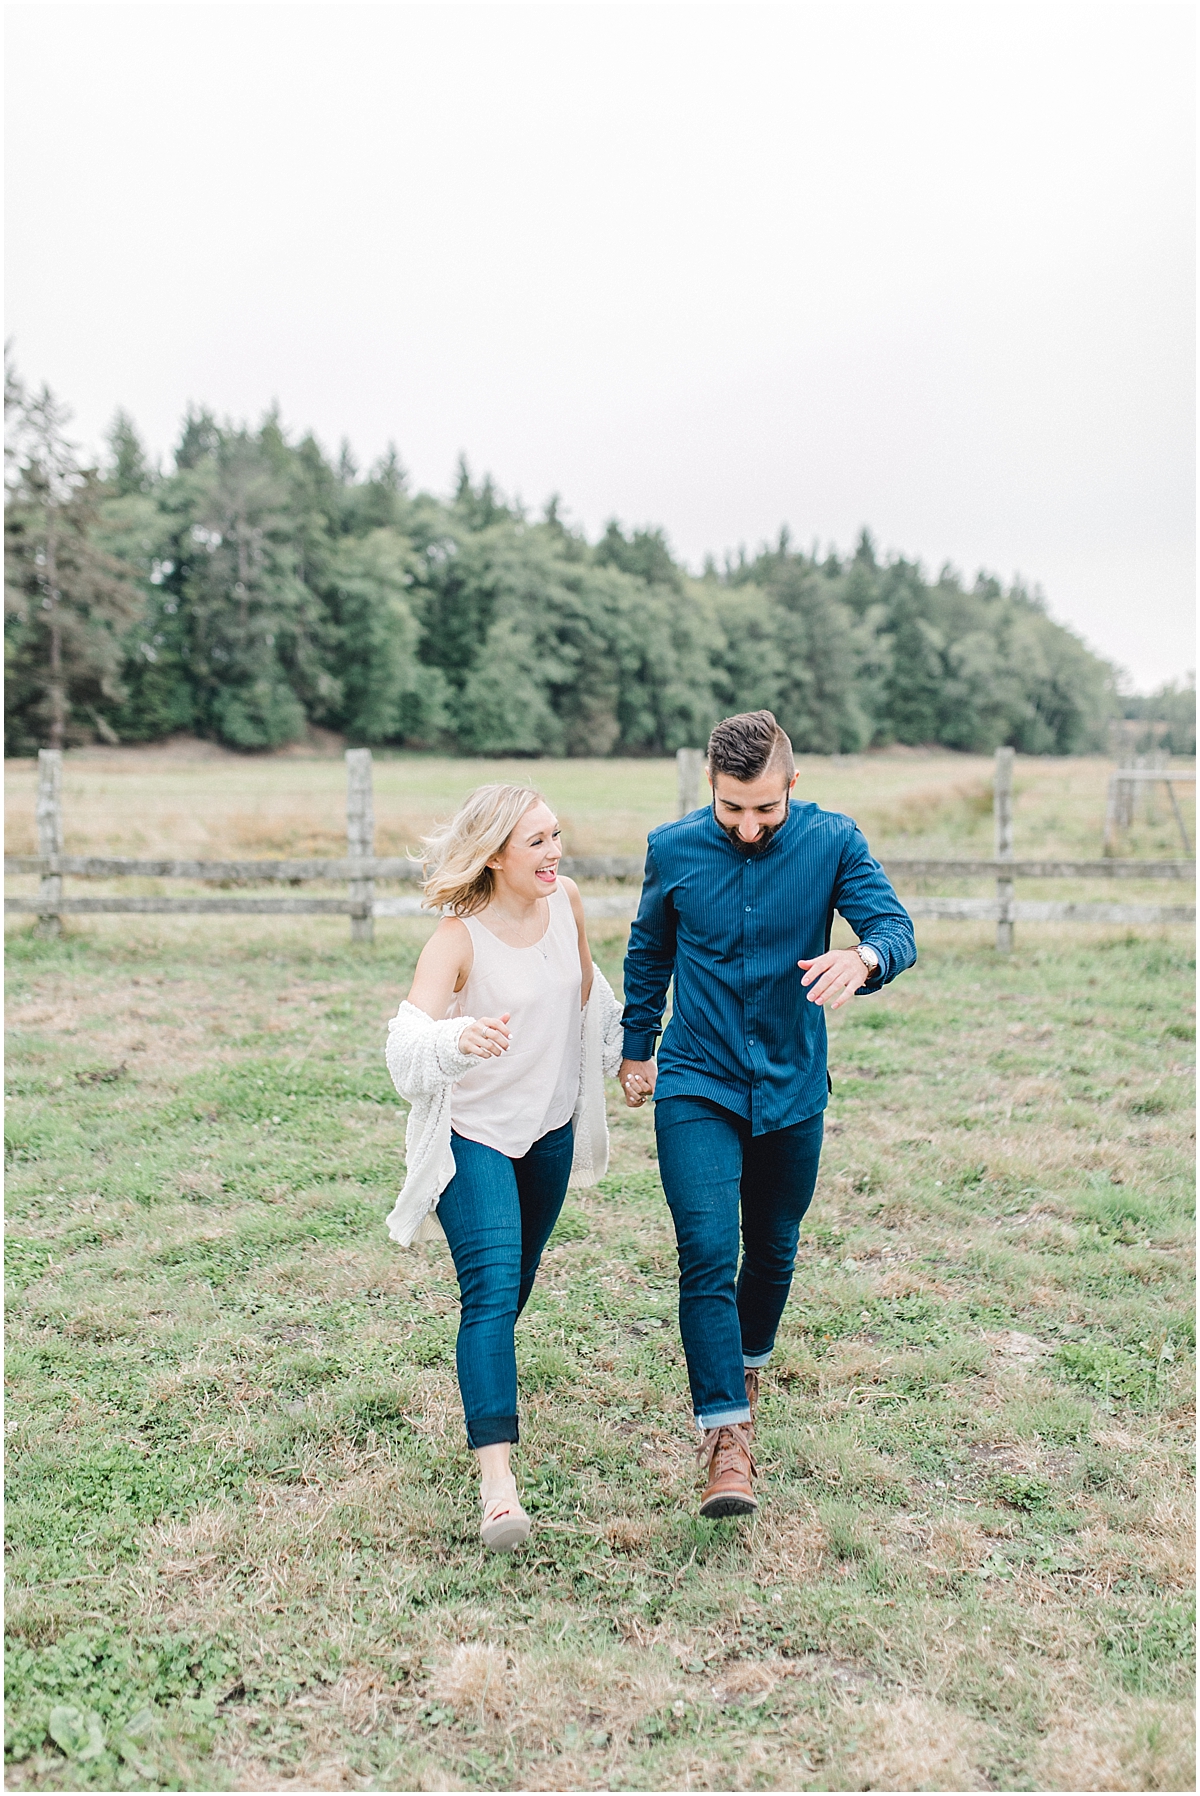 Emma Rose Company | PNW Engagement Session | What to Wear for Pictures | Rose Ranch Engagement | Sunset | Kindred Presets | Seattle Wedding Photographer Light and Airy_0283.jpg